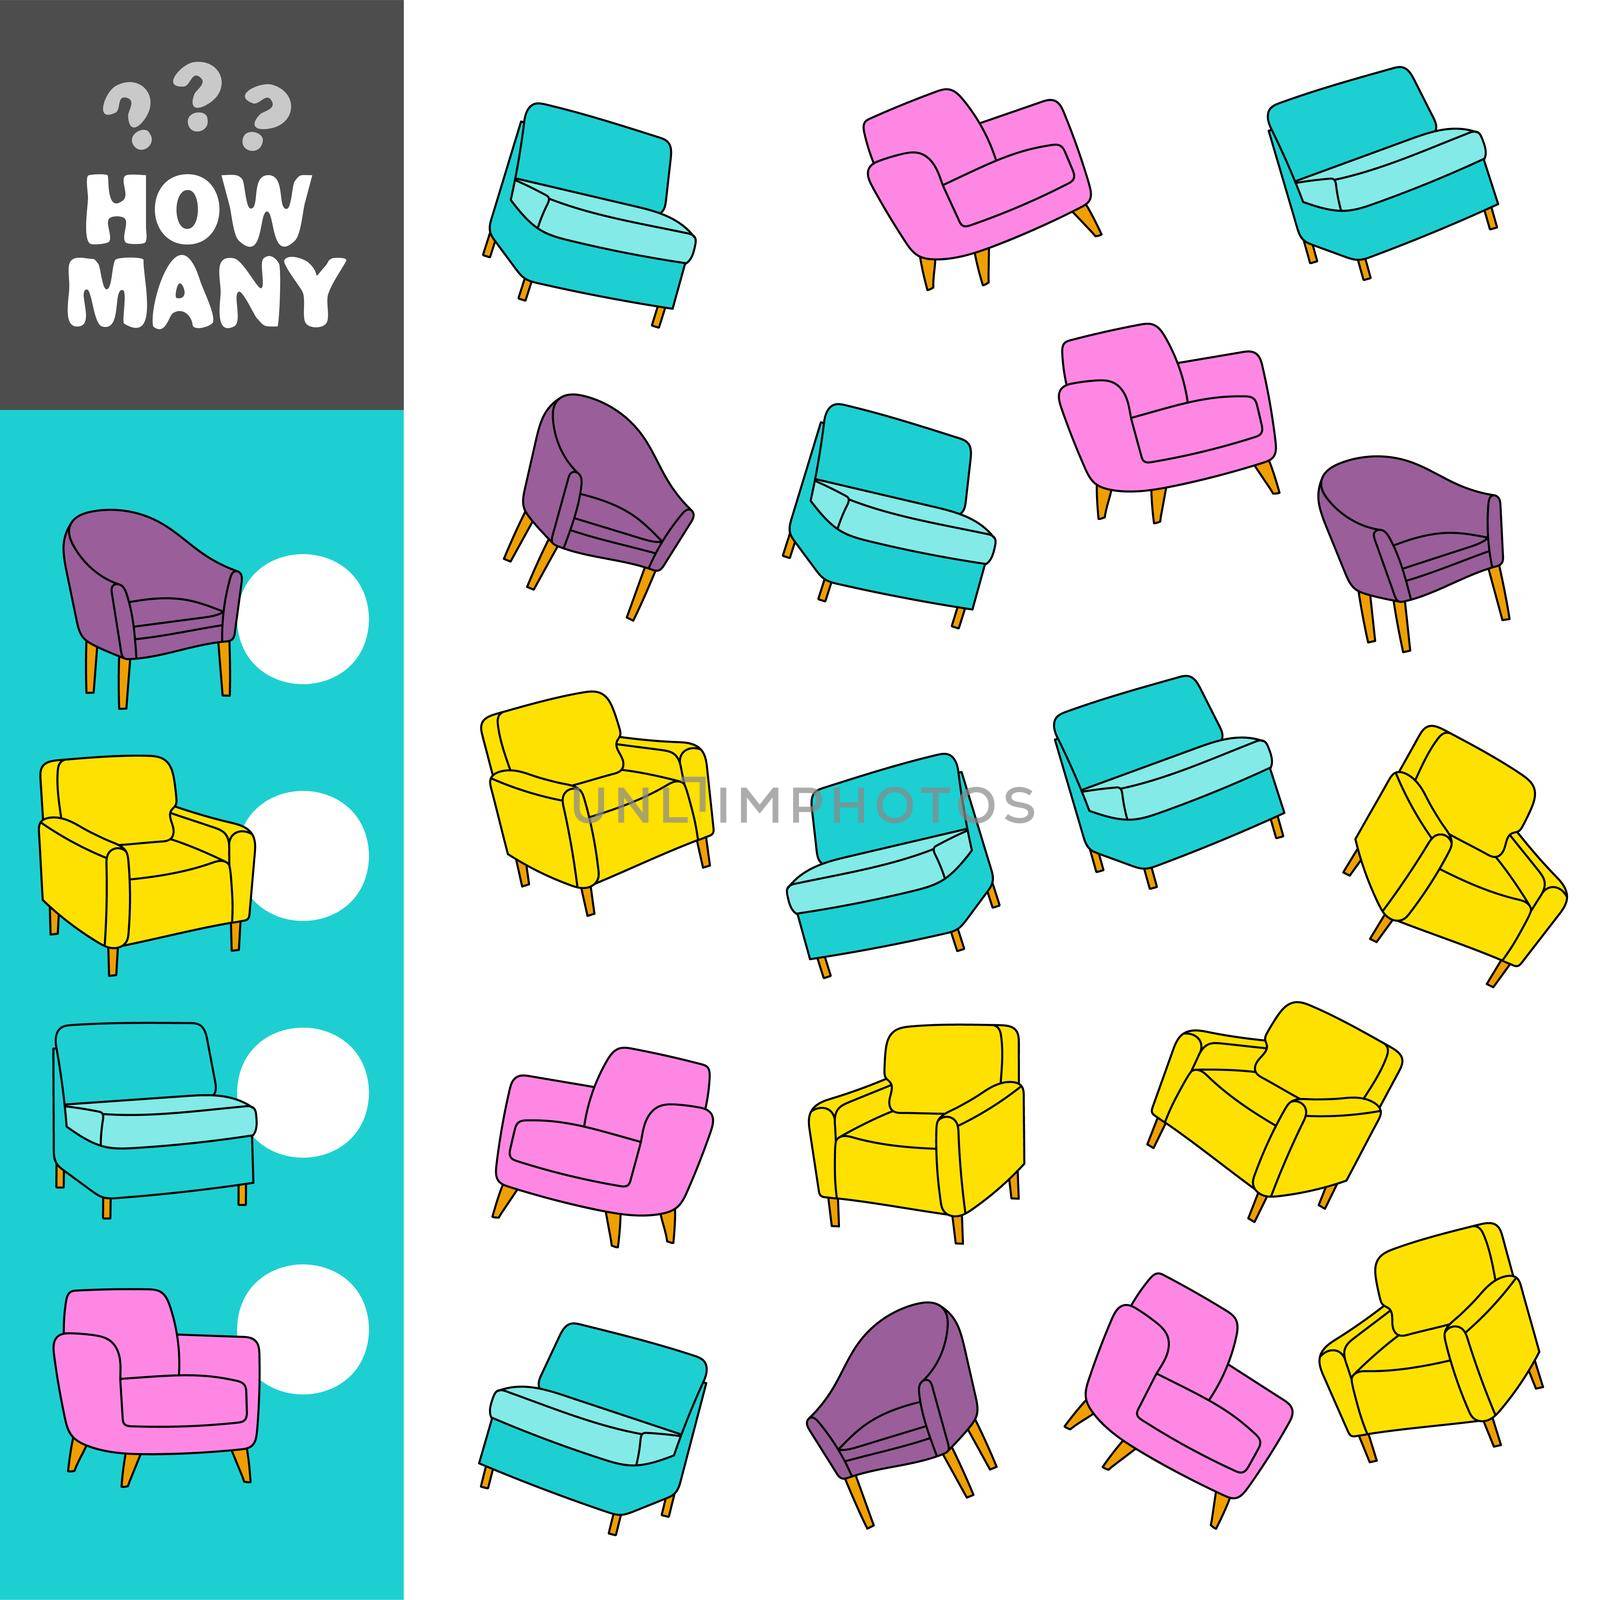 Printable worksheet for kindergarten and preschool. Math game for preschool and school children. Counting game with chairs